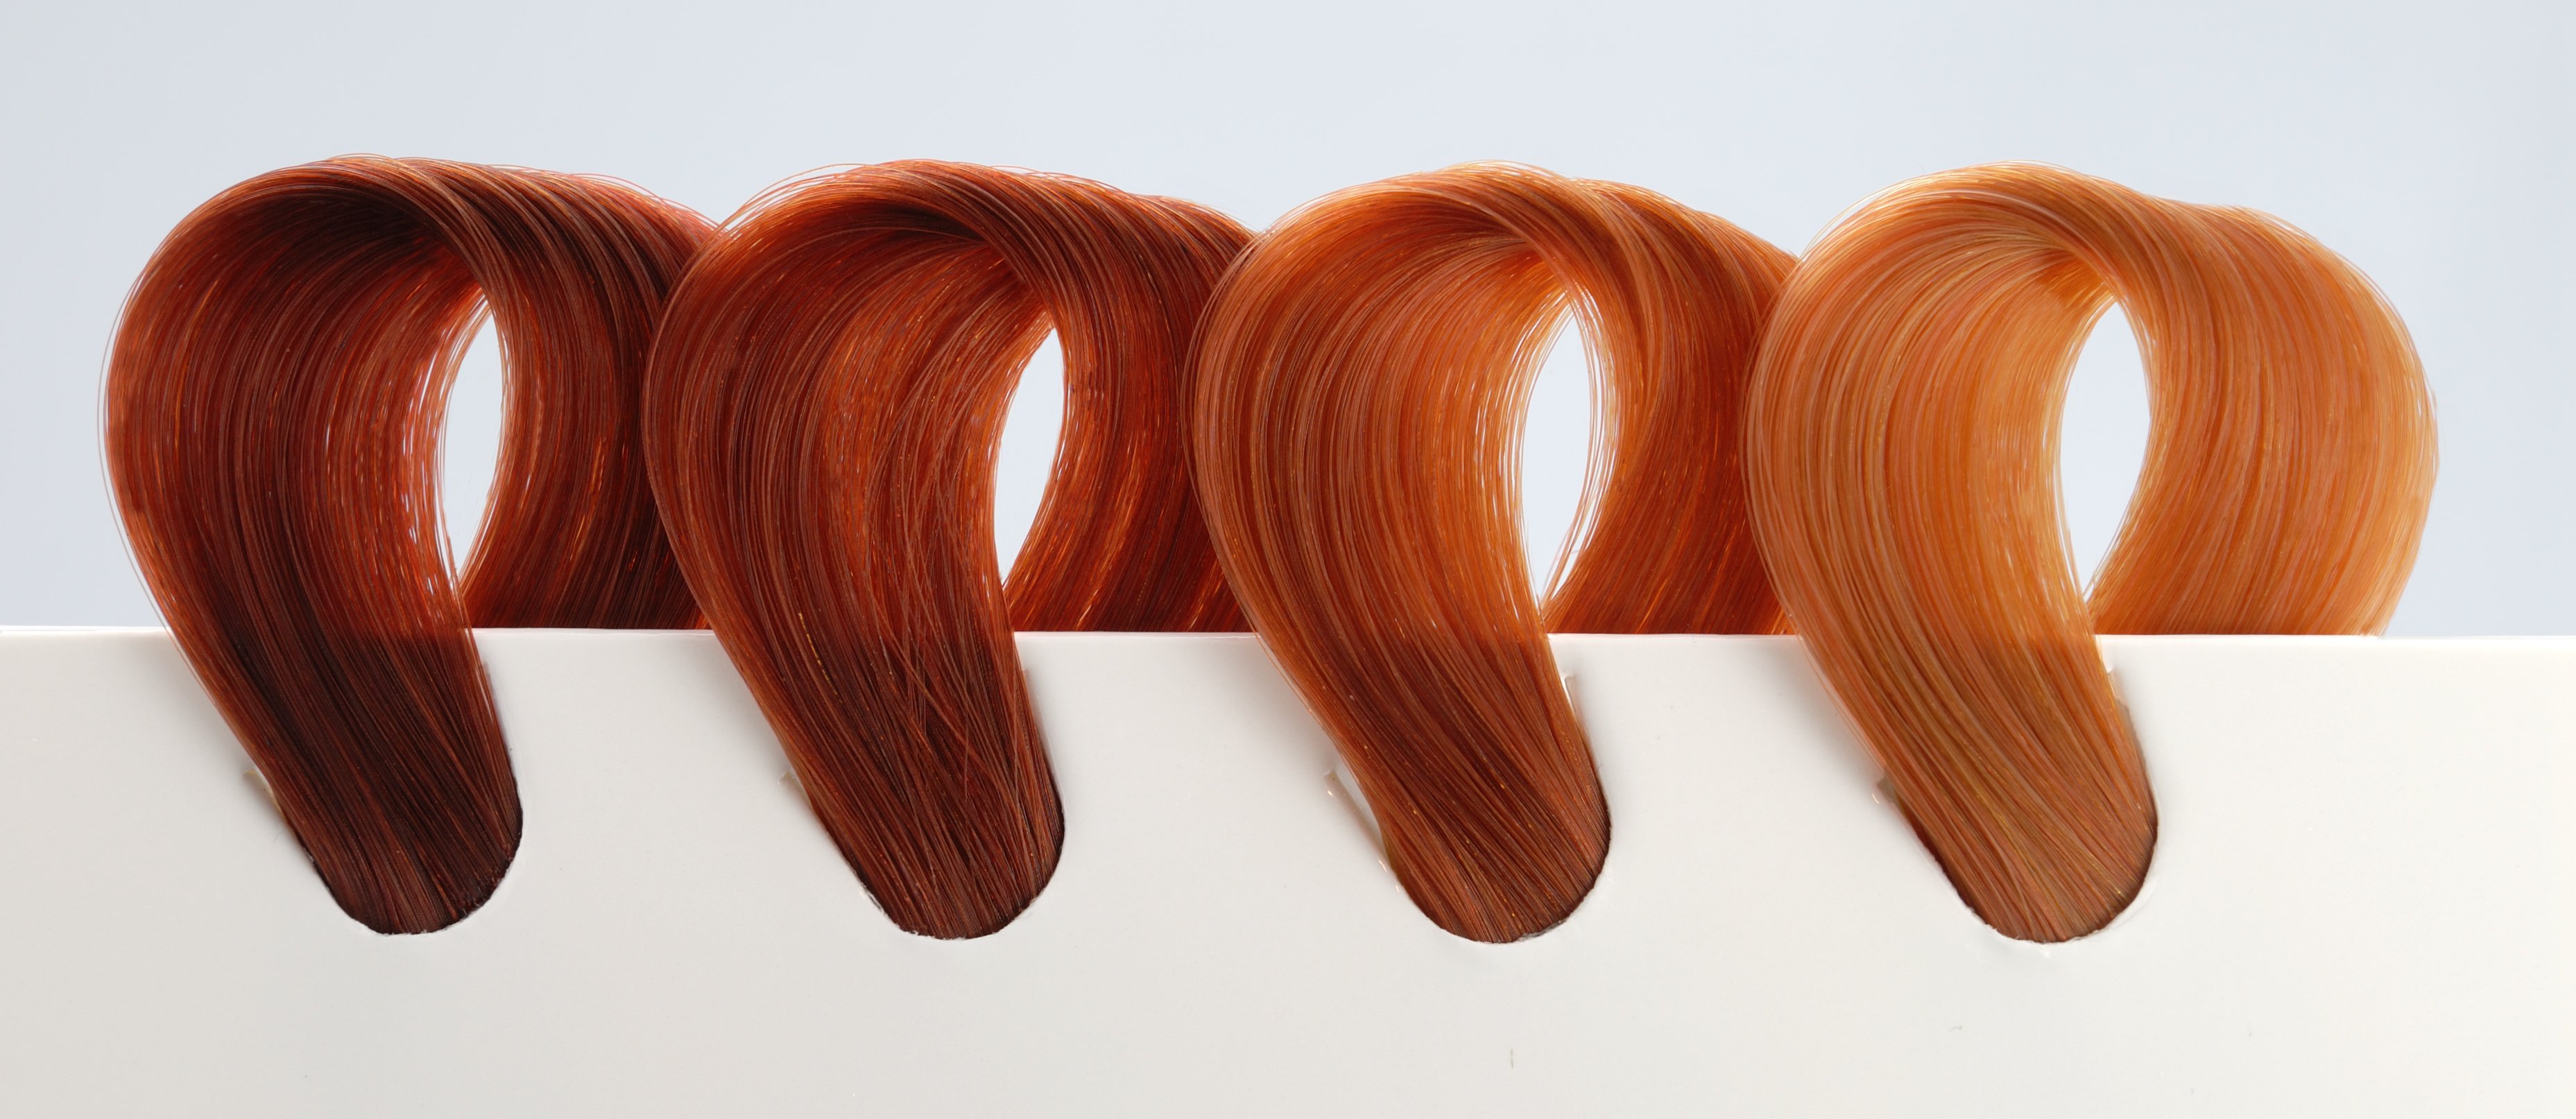 A picture of locks of hair colored in different shades of copper | Source: Getty Images